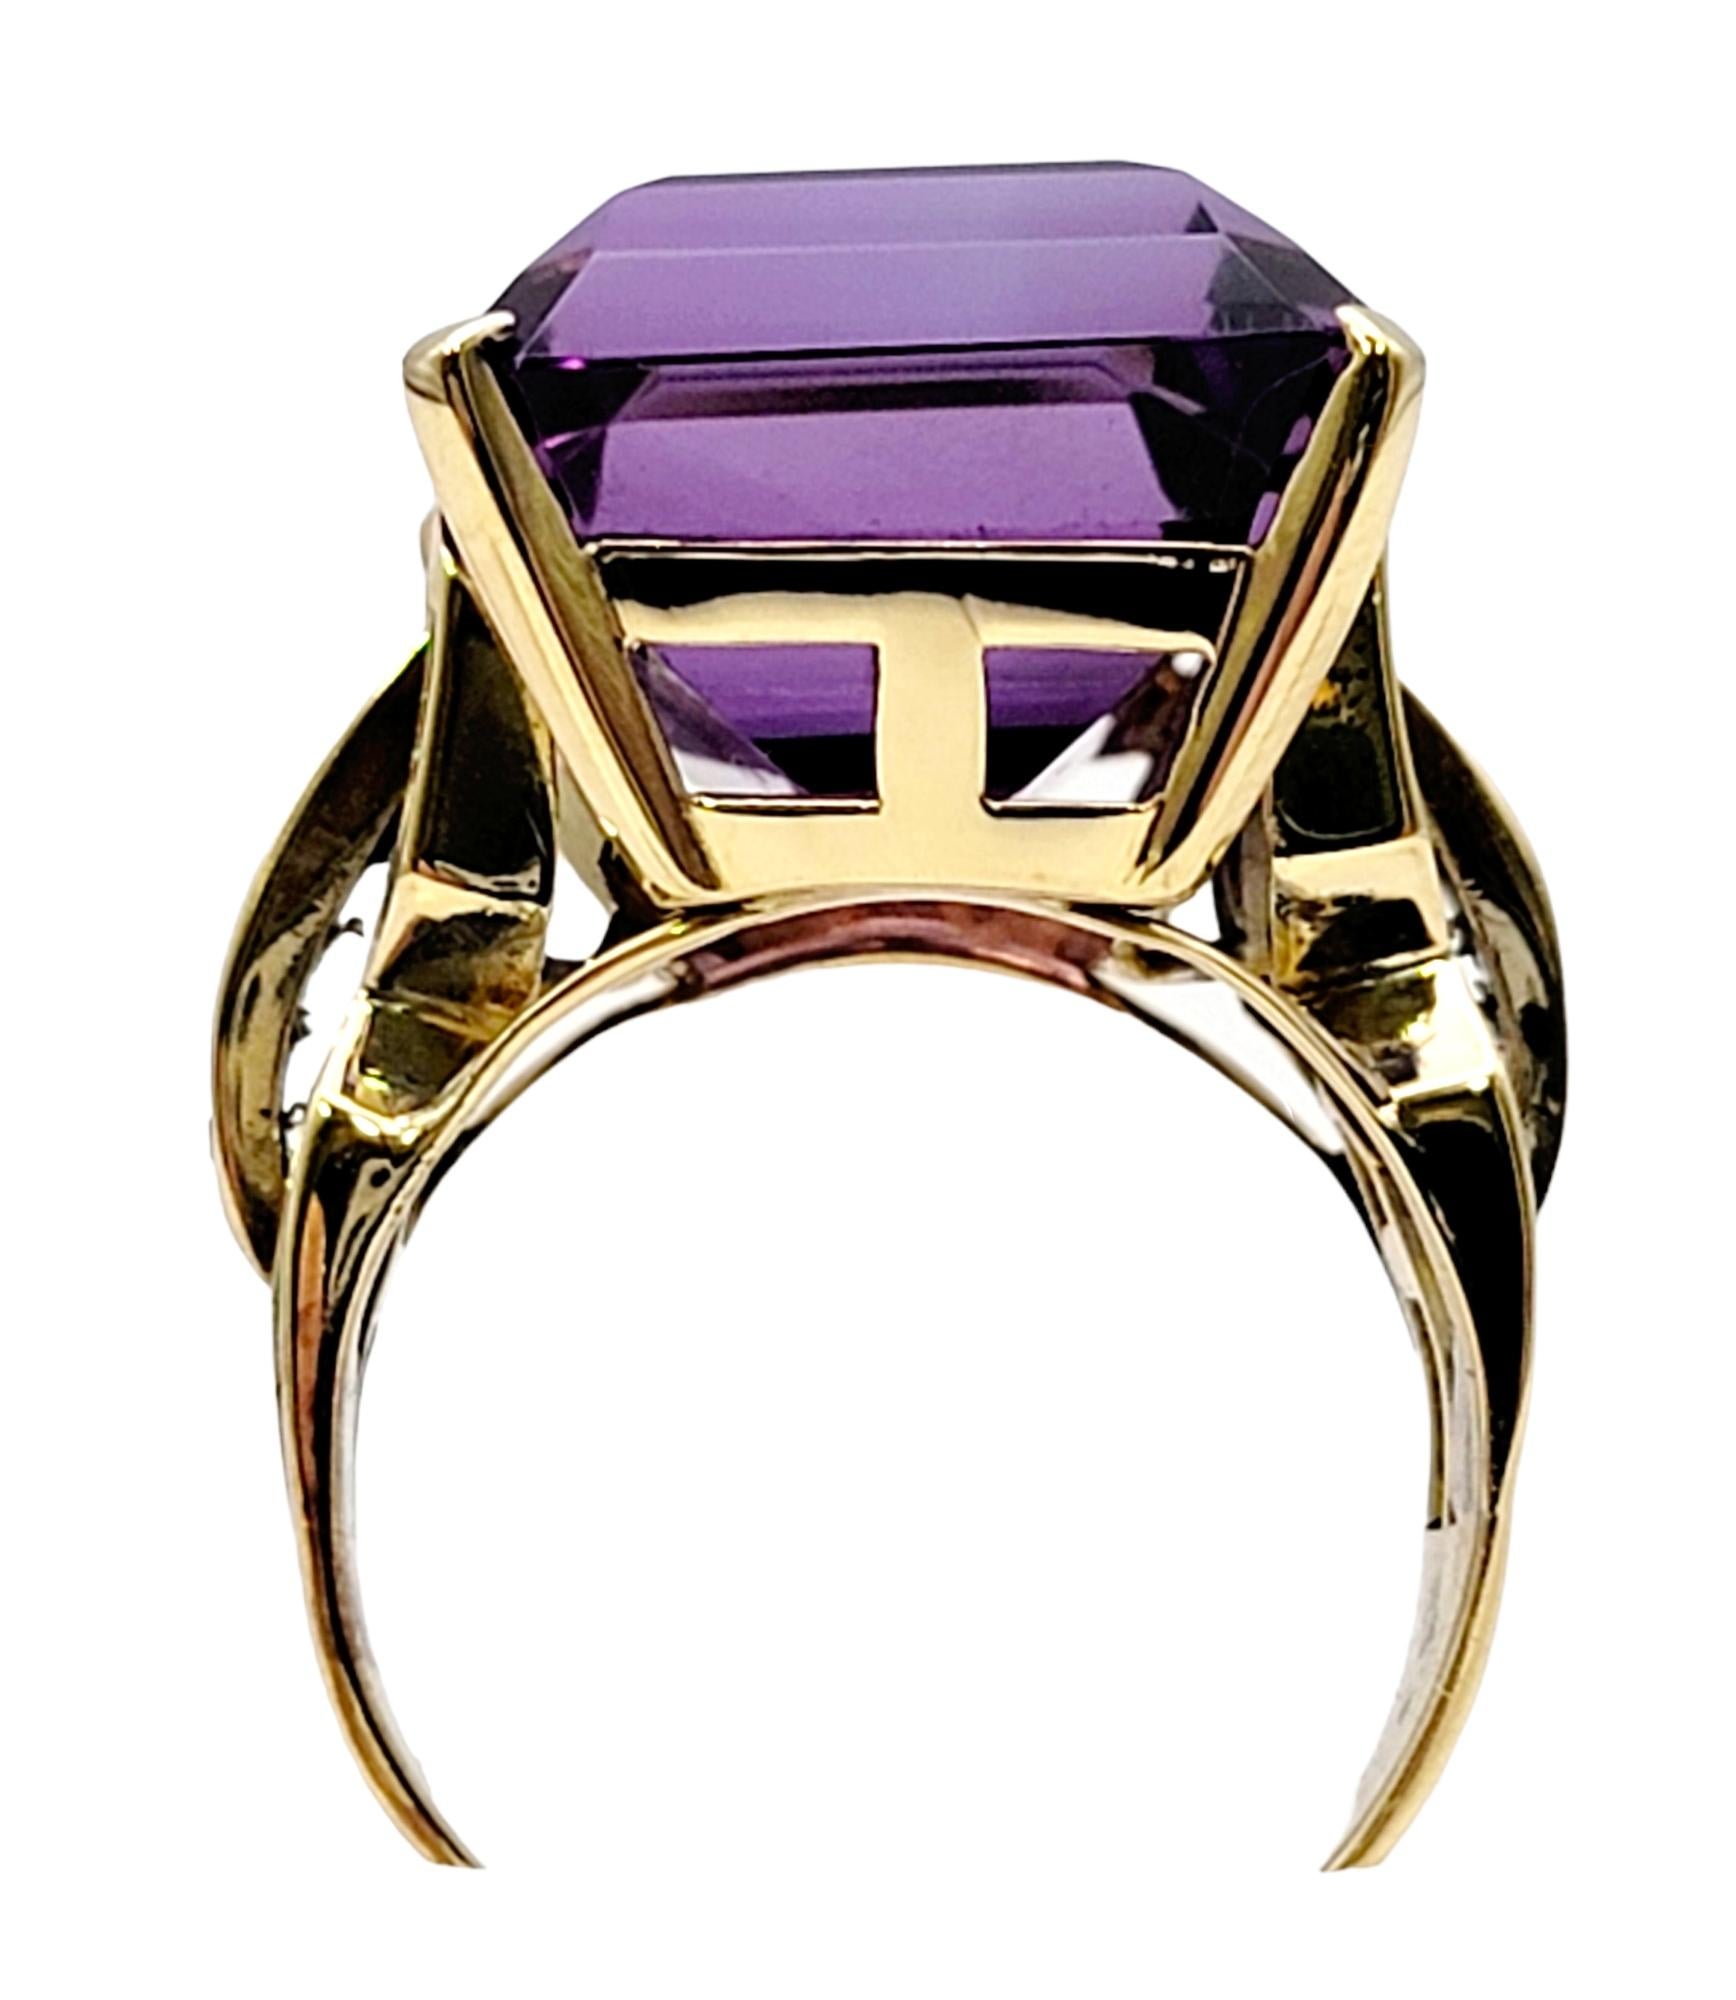 Huge 34.85 Carat Emerald Cut Amethyst Cocktail Ring with Side Diamond Detailing For Sale 3